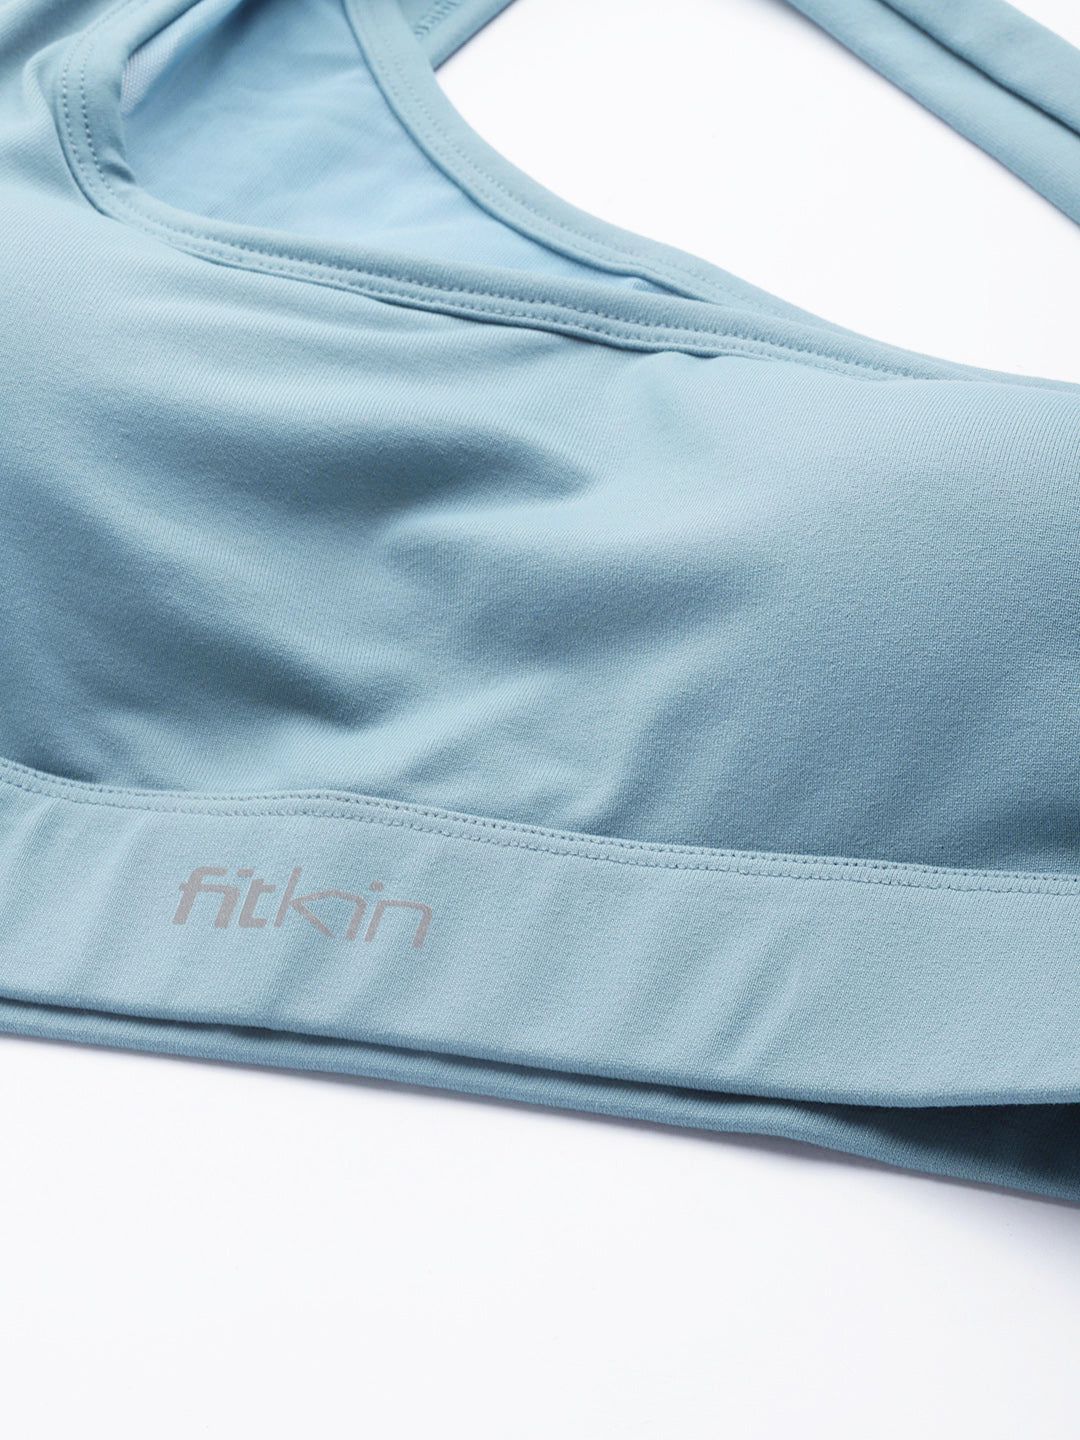 All In One (Sports Bra and Blouse)-Light Blue